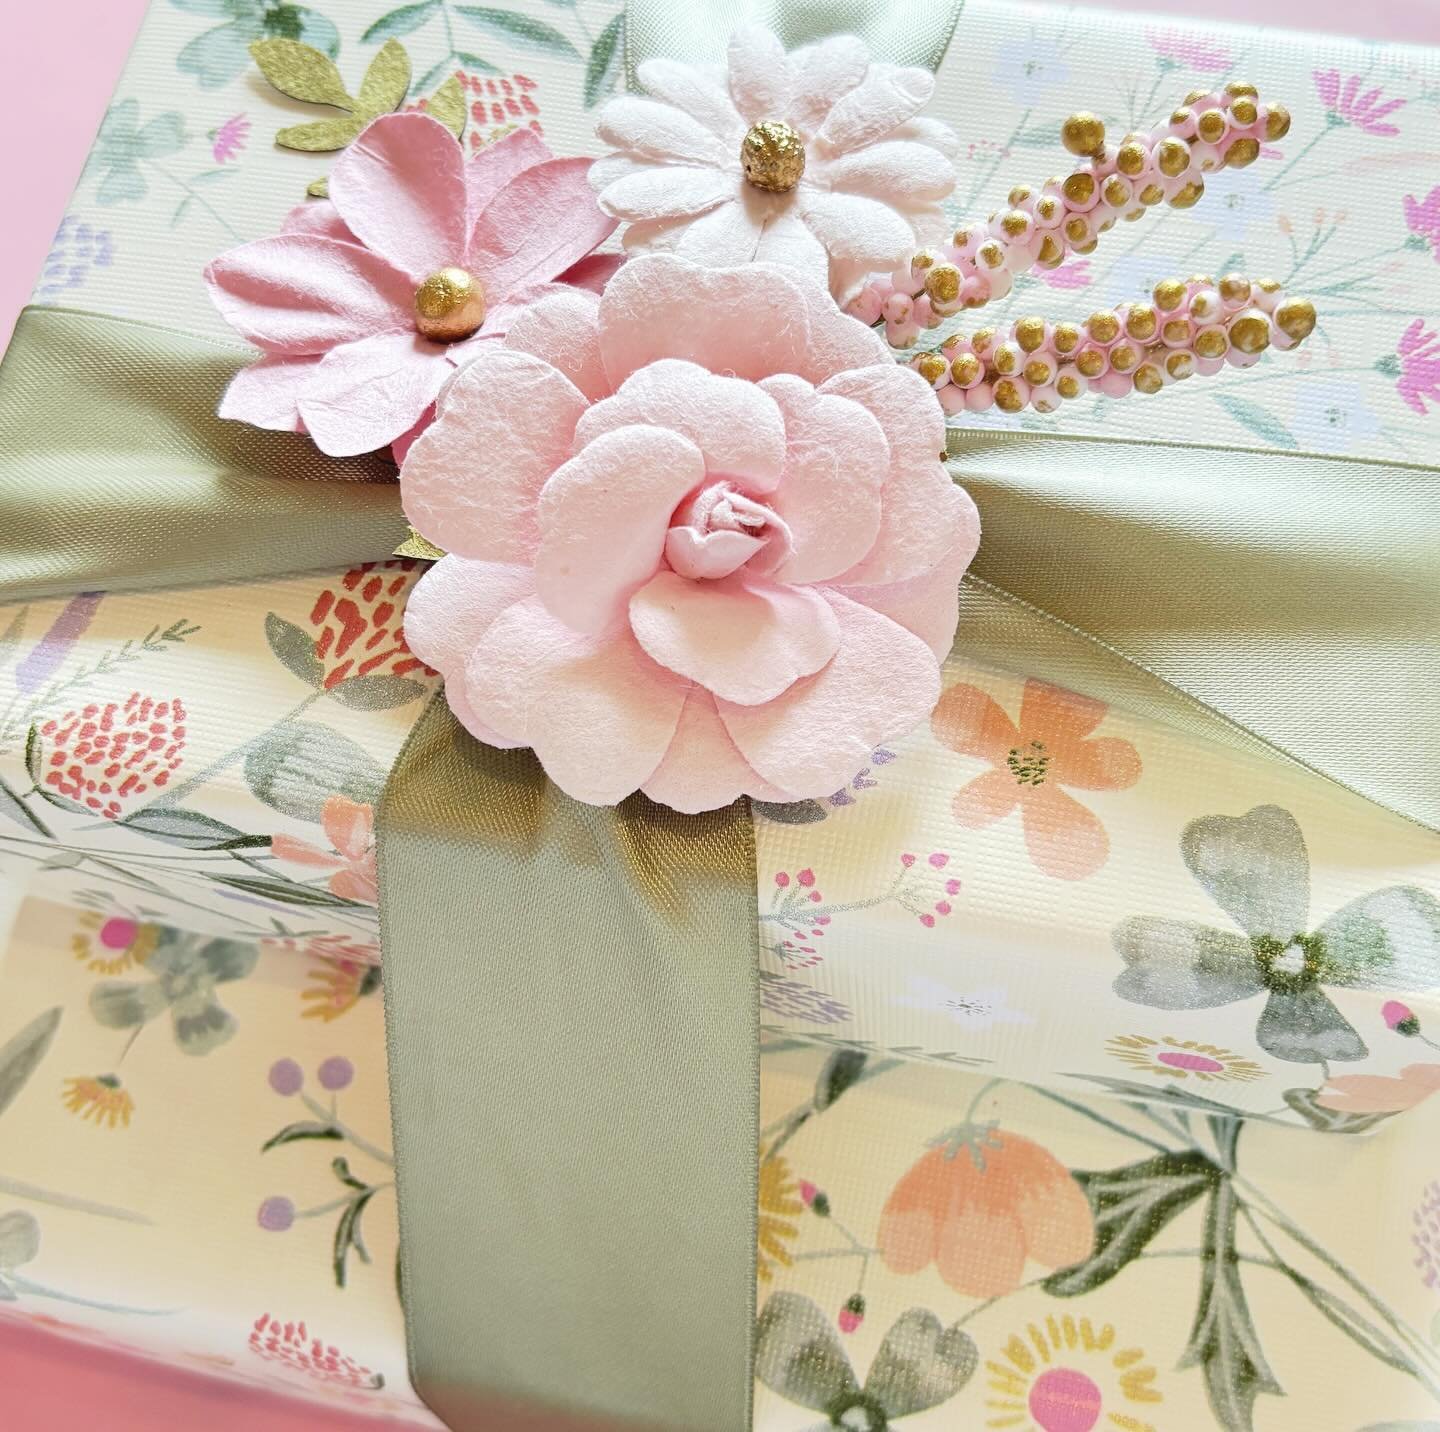 Loving all the floral papers and embellishments for my Mother&rsquo;s Day gifting clients 🌸 🌷🎀

Jackson friends,message me or visit my website in bio to book your wrapping service or gift concierge experience next 🩷

#giftwrapping #giftwrapservic